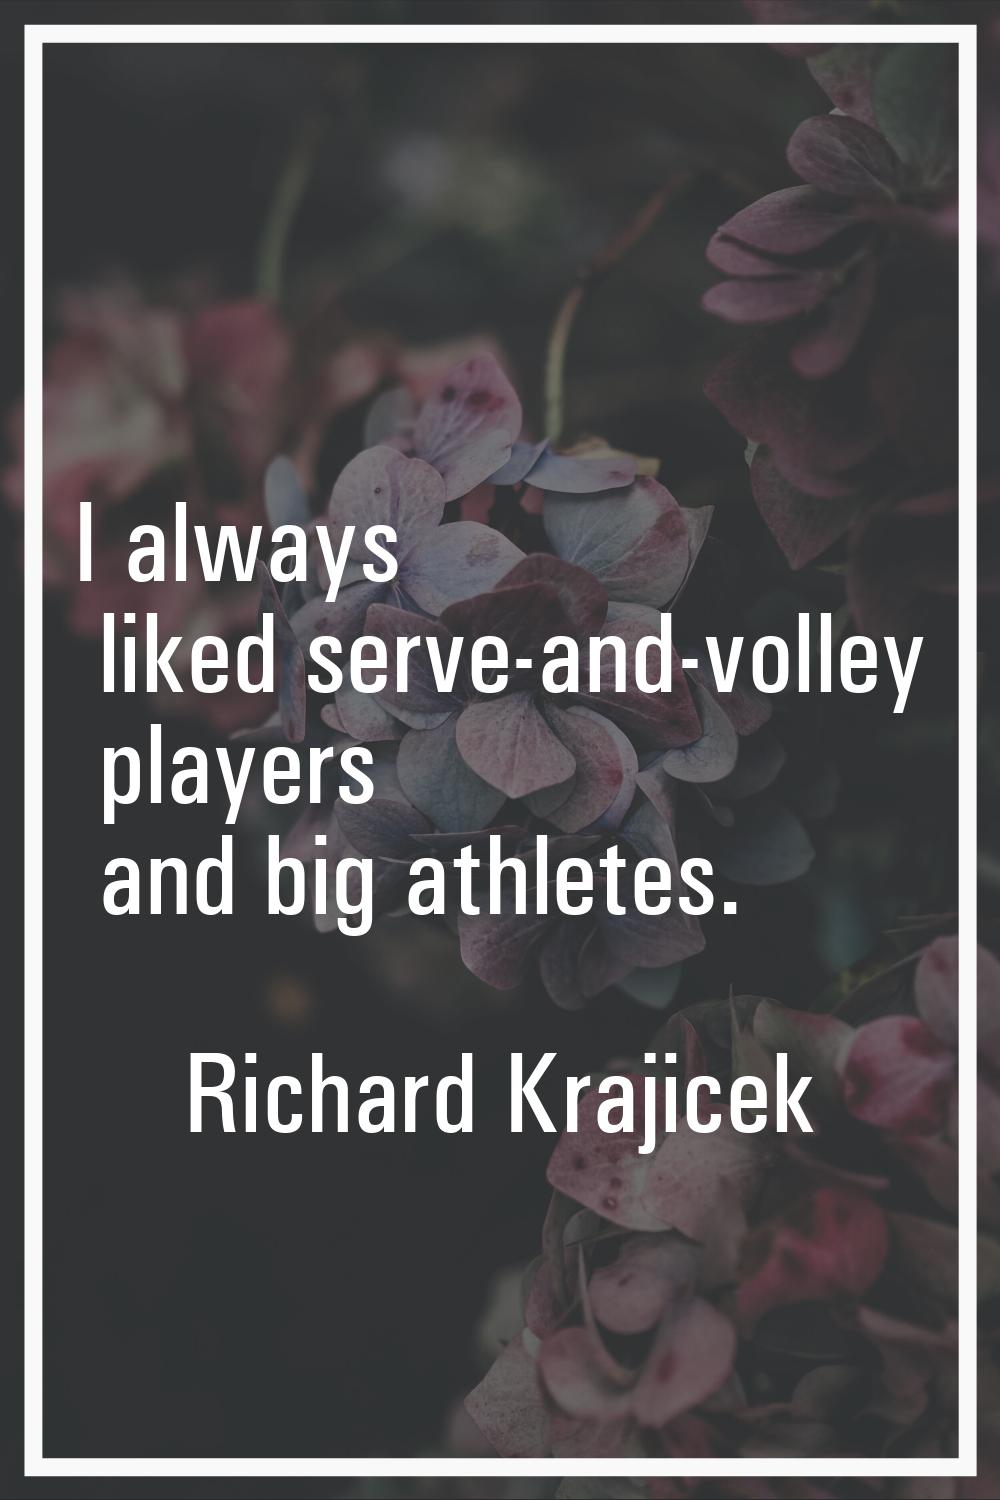 I always liked serve-and-volley players and big athletes.